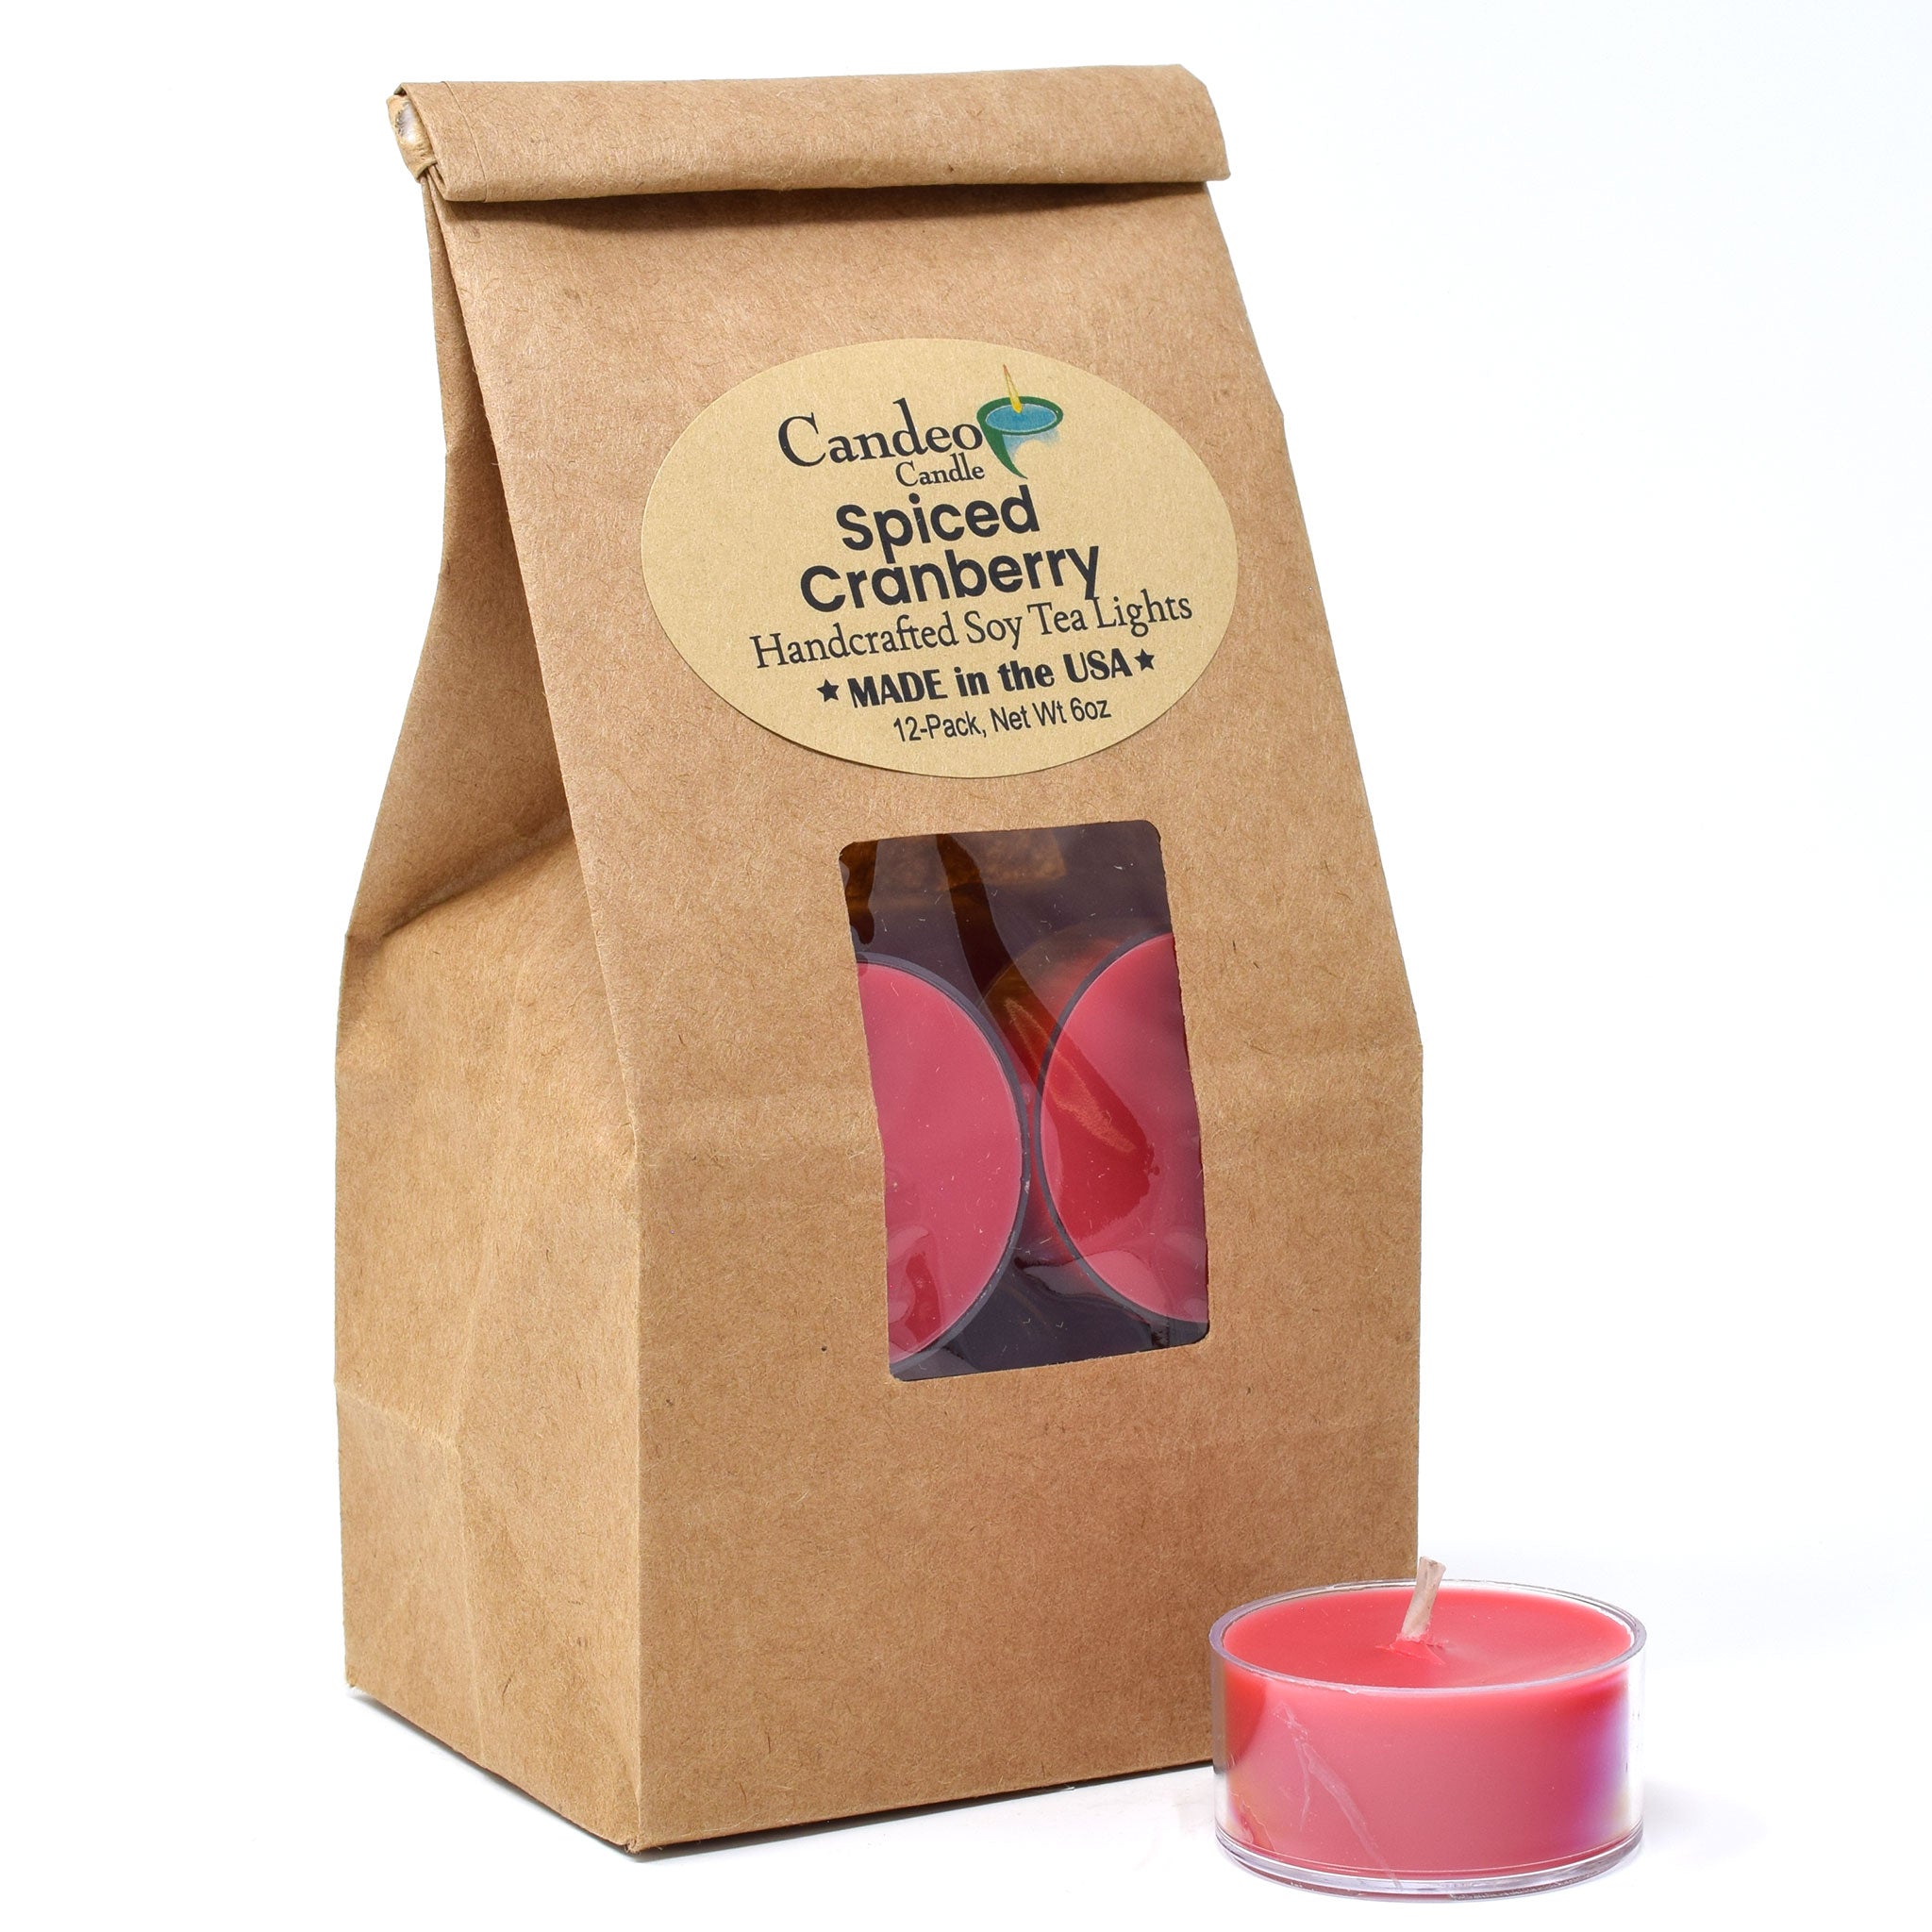 Spiced Cranberry, Soy Tea Light 12-Pack - Candeo Candle